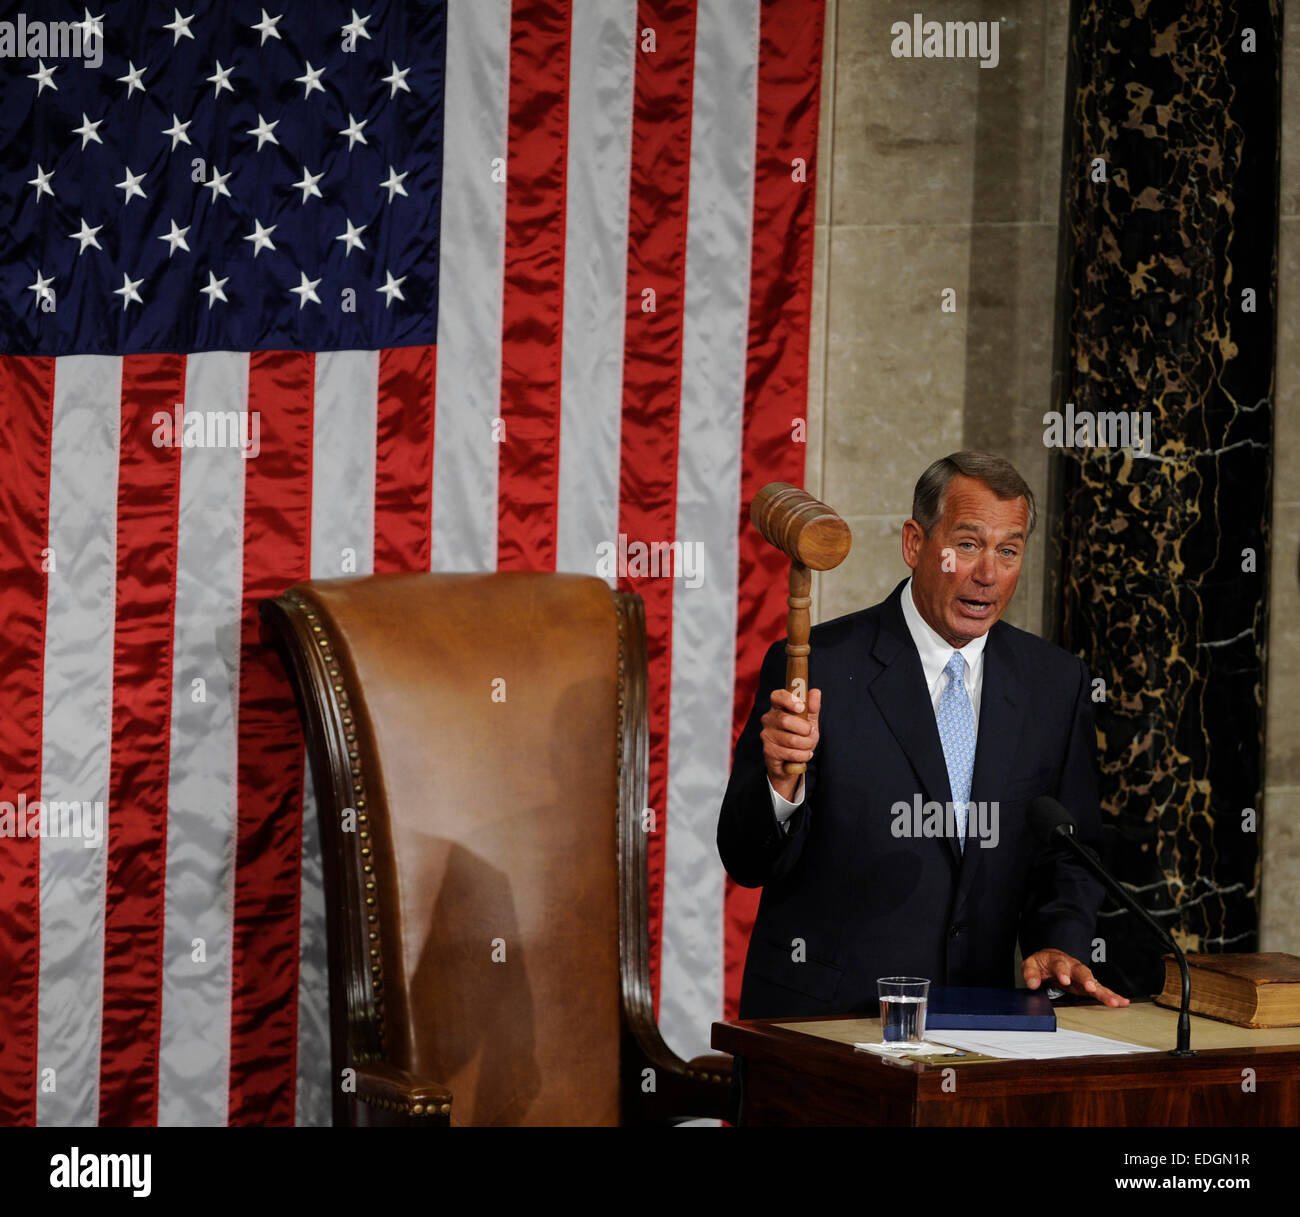 Washington, DC, USA. 6th Jan, 2015. Speaker of the U.S. House of Representatives John Boehner attends the opening session of 114th Congress at Capitol Hill in Washington, DC, capital of the United States, Jan. 6, 2015. John Boehner, a Republican from the state of Ohio, was re-elected as Speaker of the U.S. House of Representatives Tuesday. Credit:  Bao Dandan/Xinhua/Alamy Live News Stock Photo